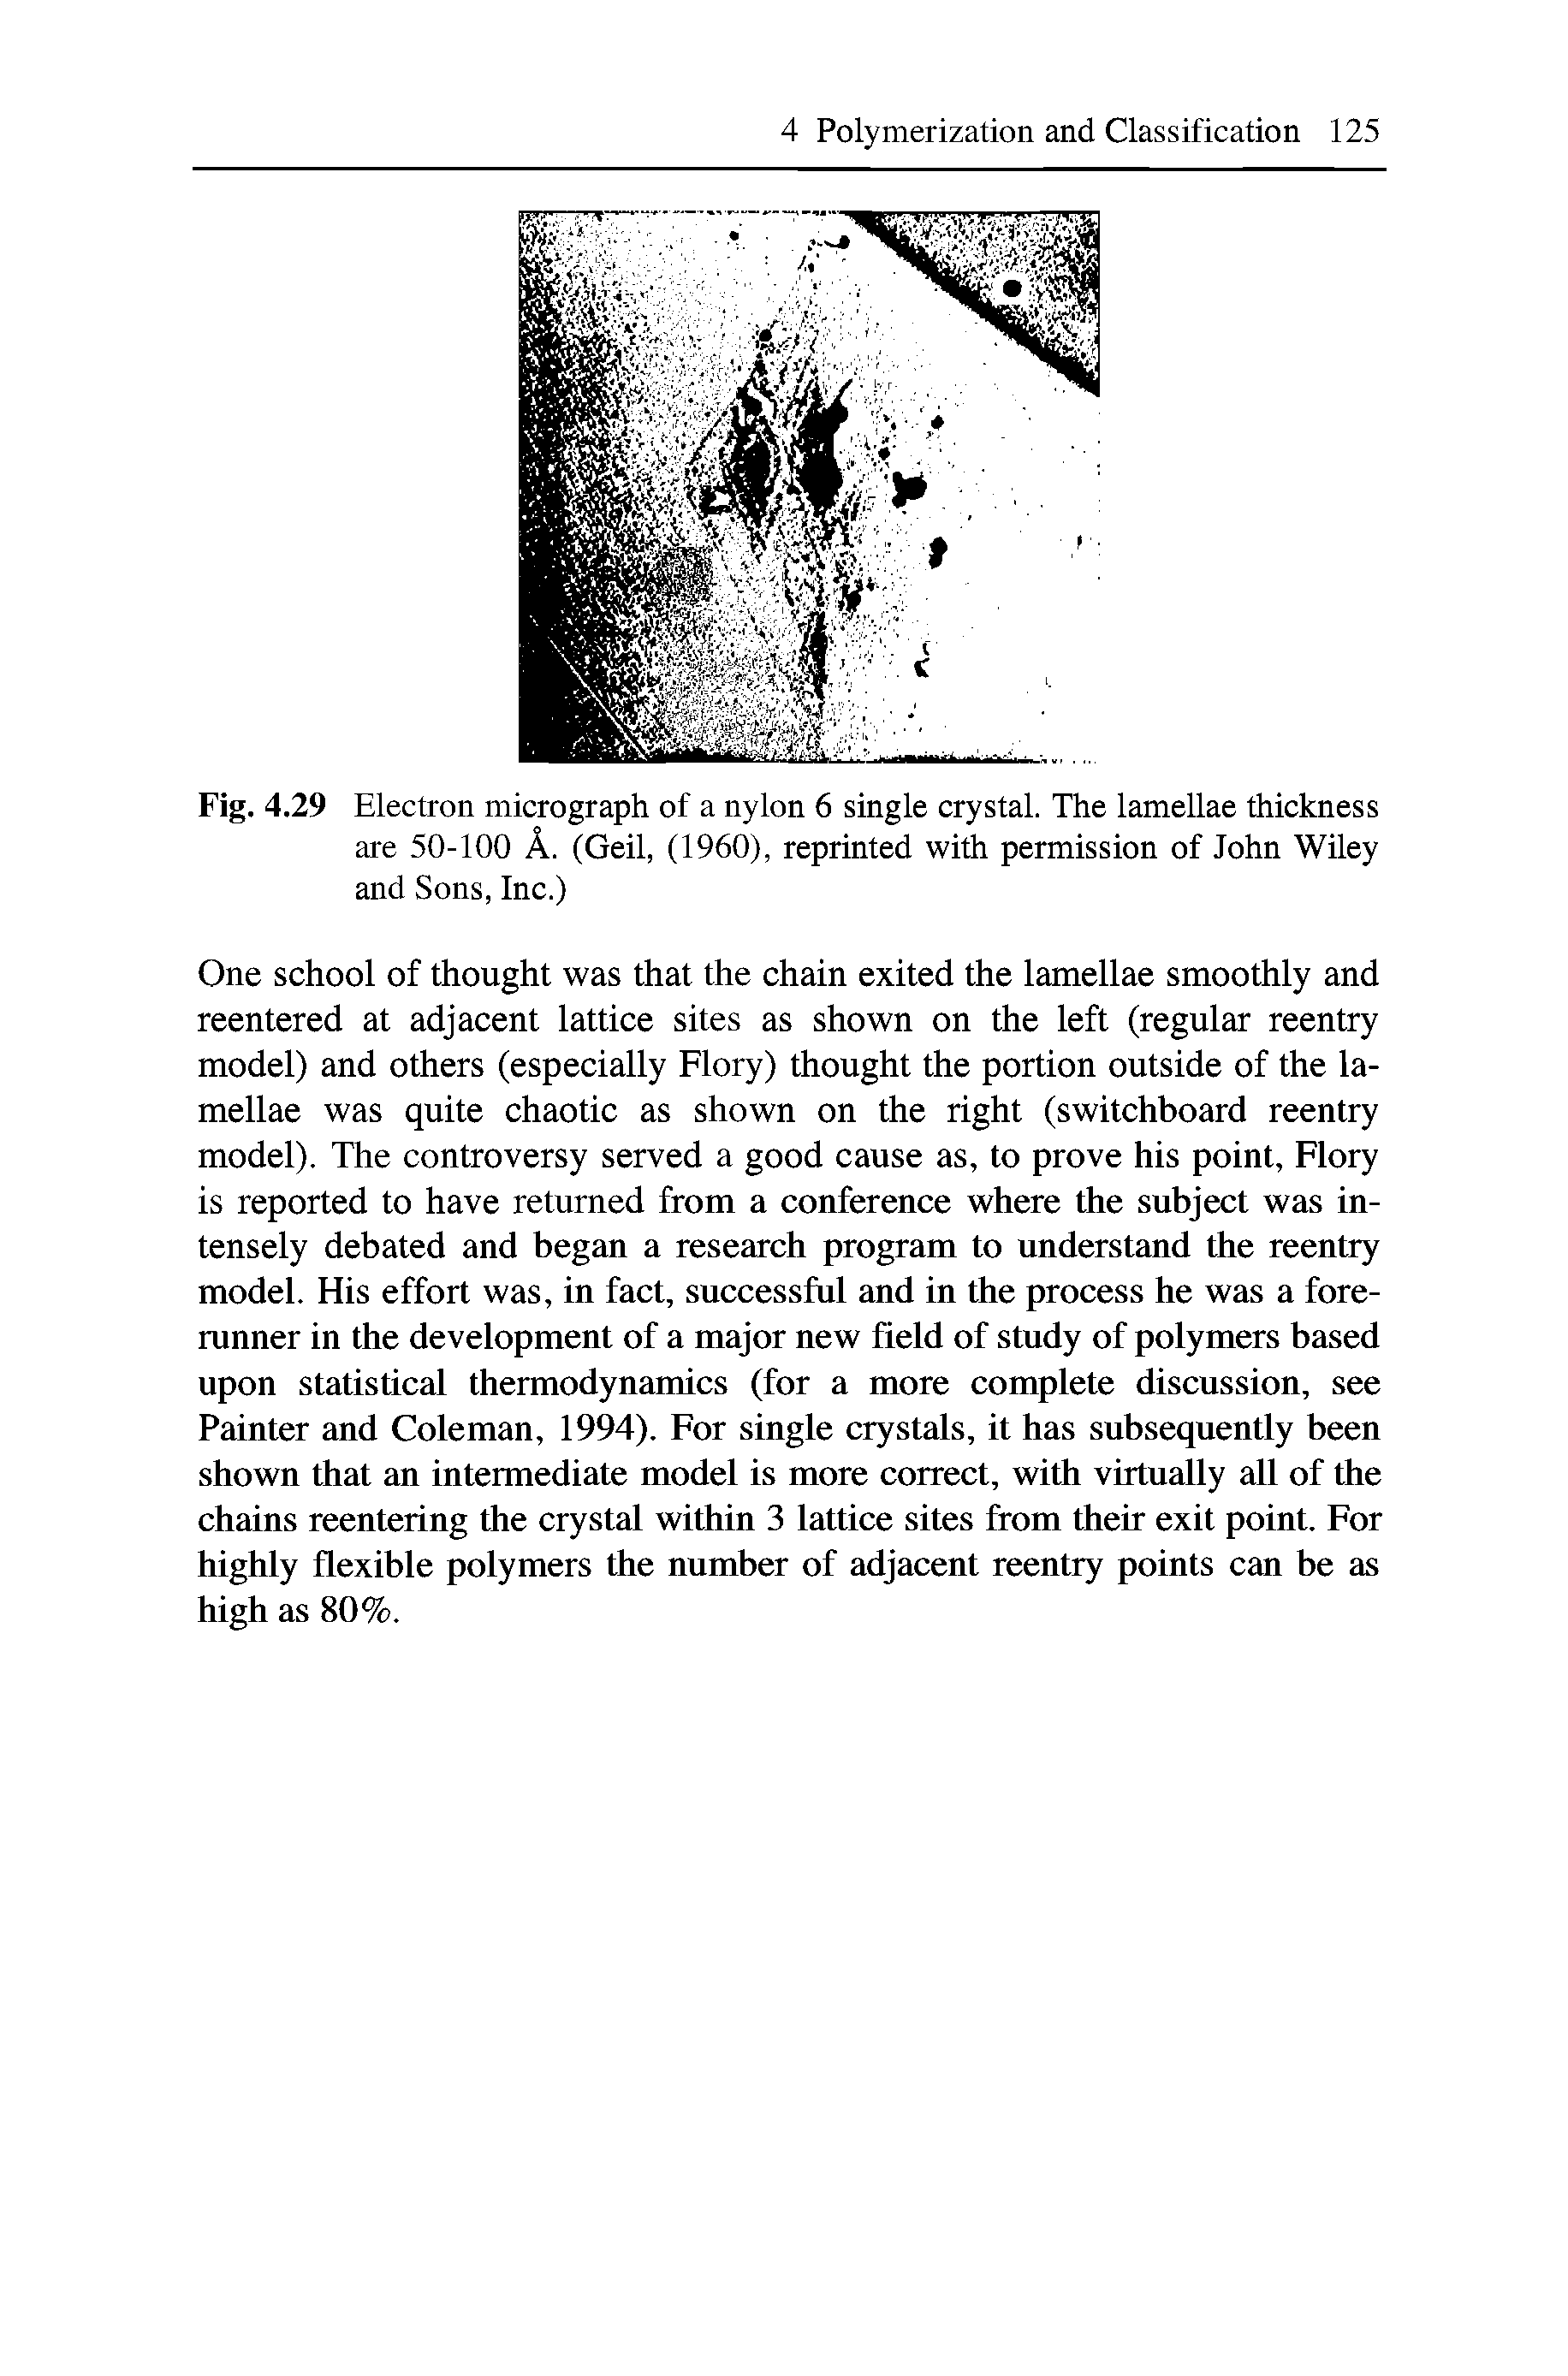 Fig. 4.29 Electron micrograph of a nylon 6 single crystal. The lamellae thickness are 50-100 A. (Geil, (1960), reprinted with permission of John WUey and Sons, Inc.)...